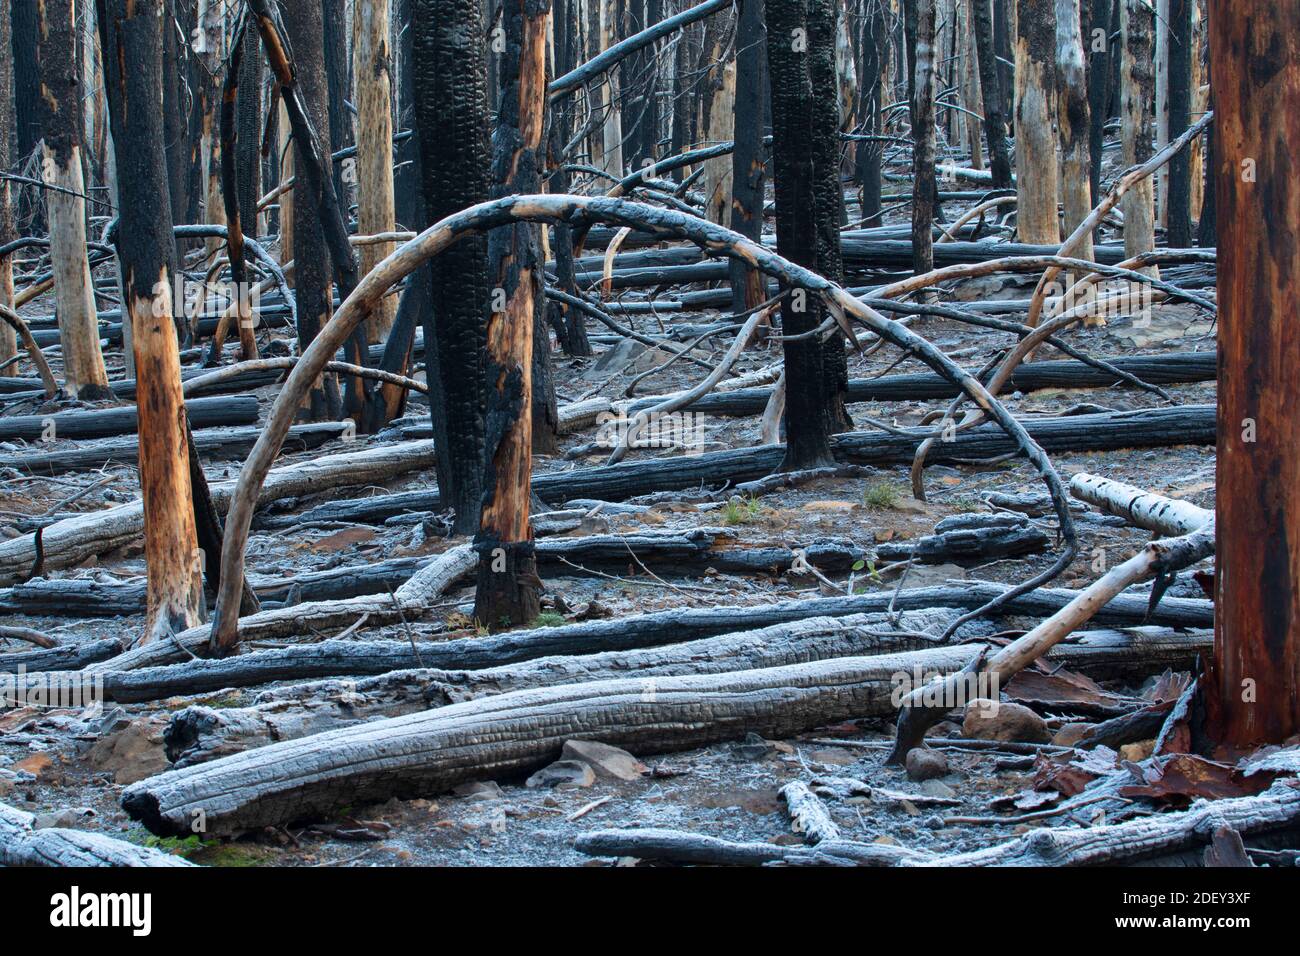 North Pelican Fire Snags, Sky Lakes Wilderness, Winema National Forest, Oregon Stockfoto